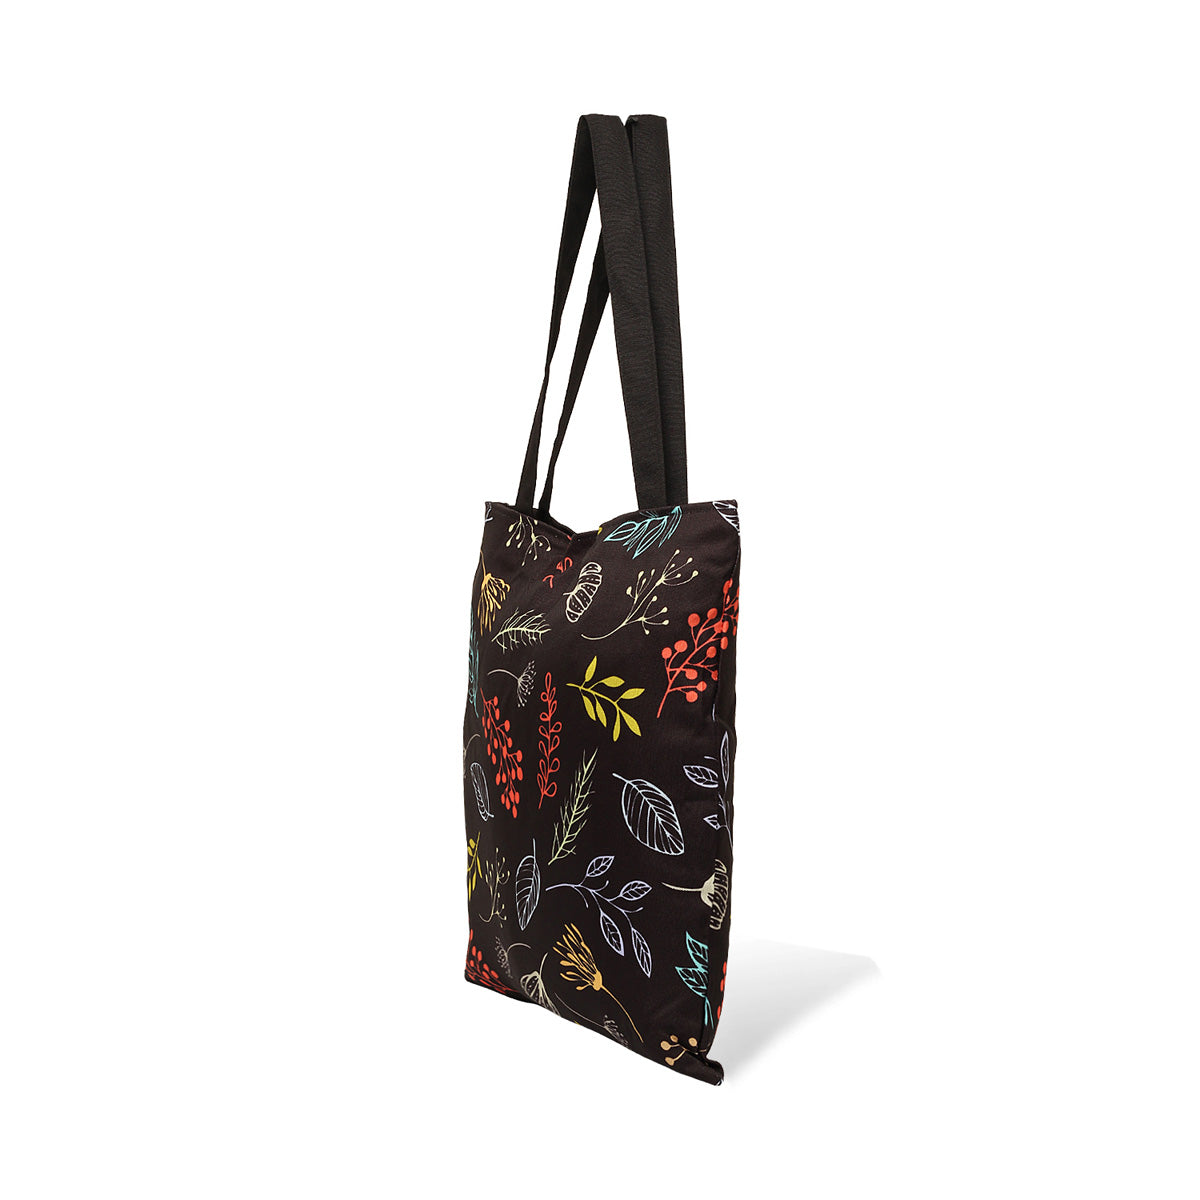 Side view of Black tote bag featuring colorful leaves and flowers.